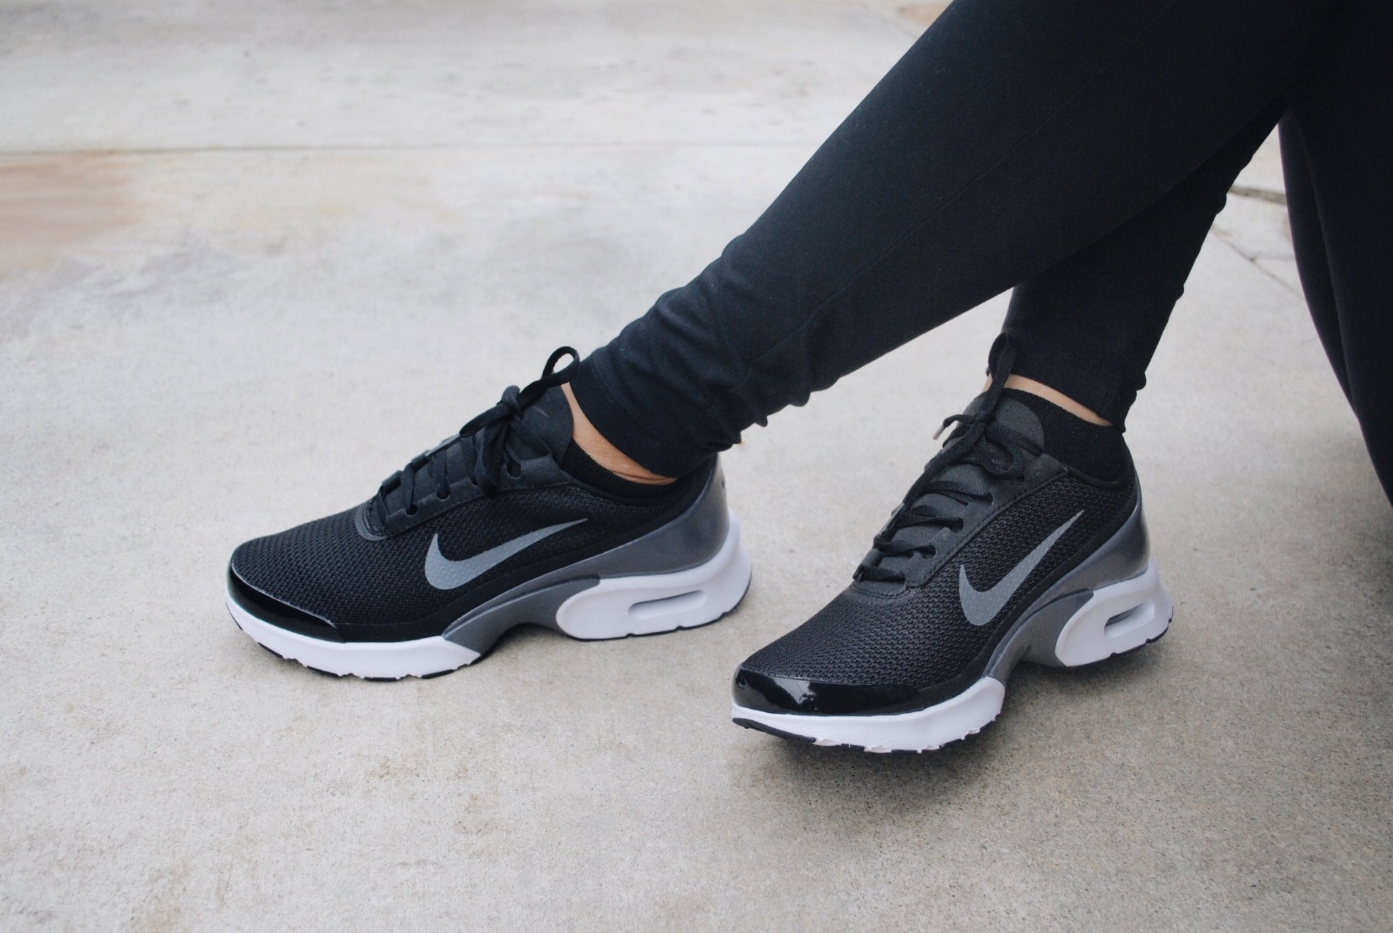 Meet the New Ladies-Only Nike Air Max Jewell — dianakmir خبز طاوه